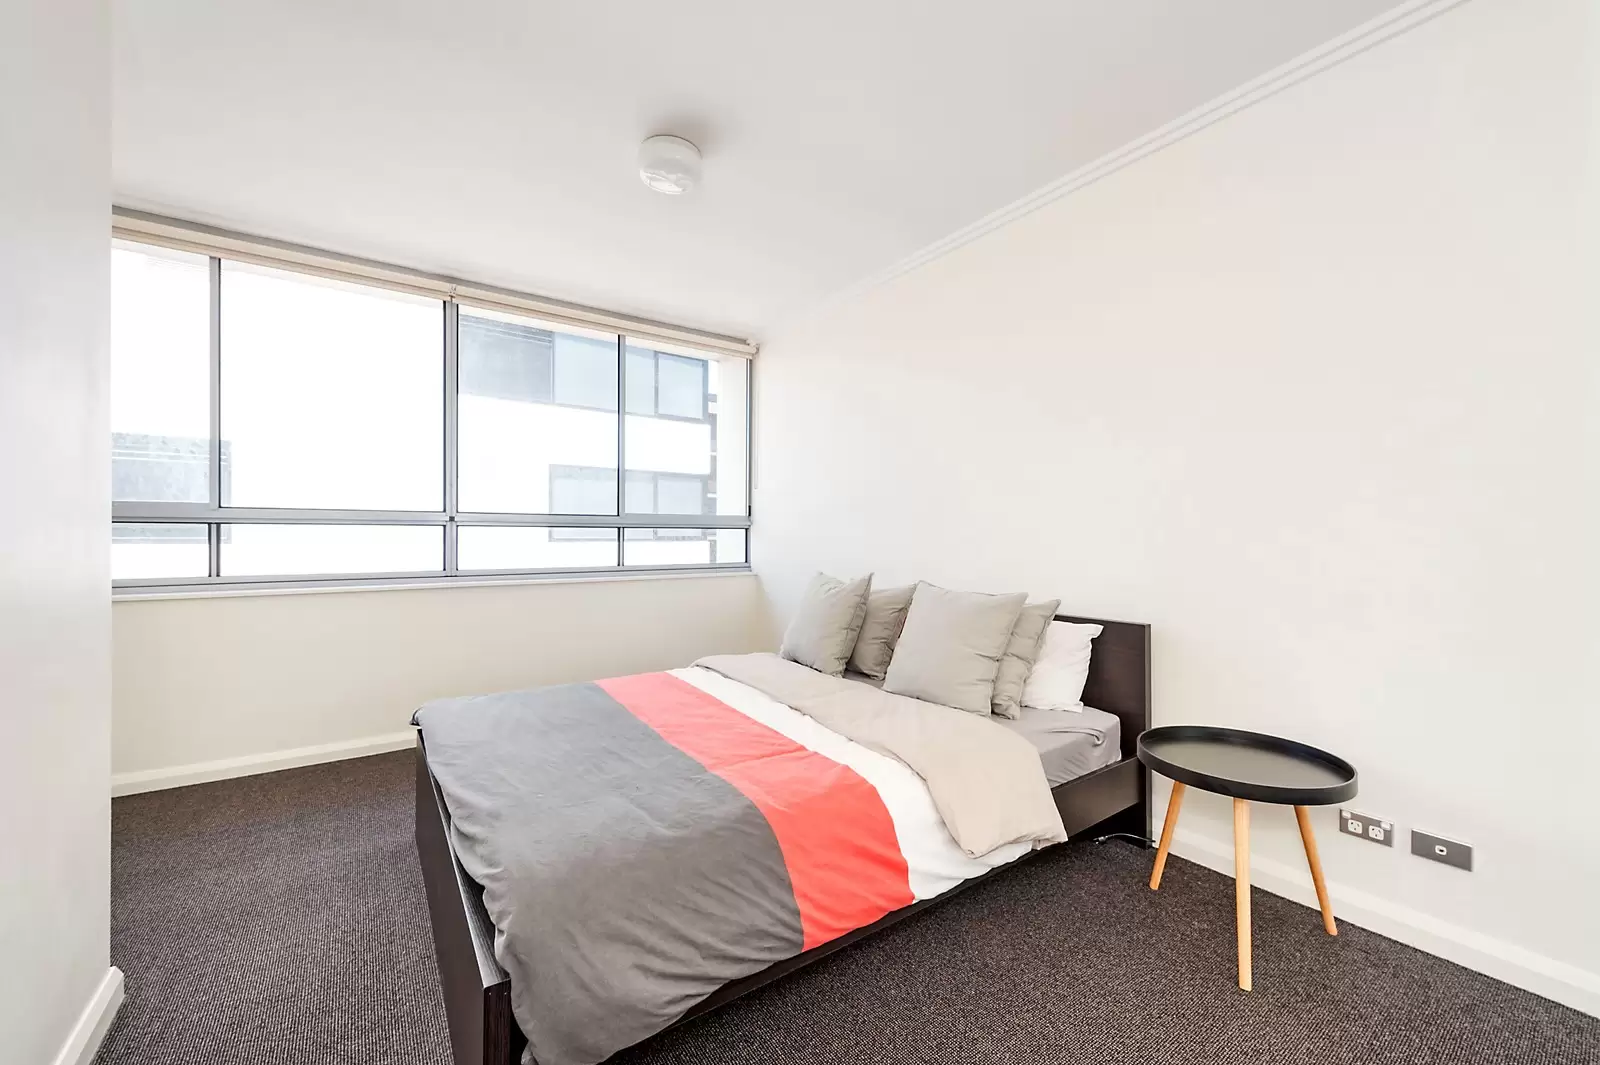 Photo #4: 219/16-20 Smail Street, Ultimo - Sold by Sydney Sotheby's International Realty